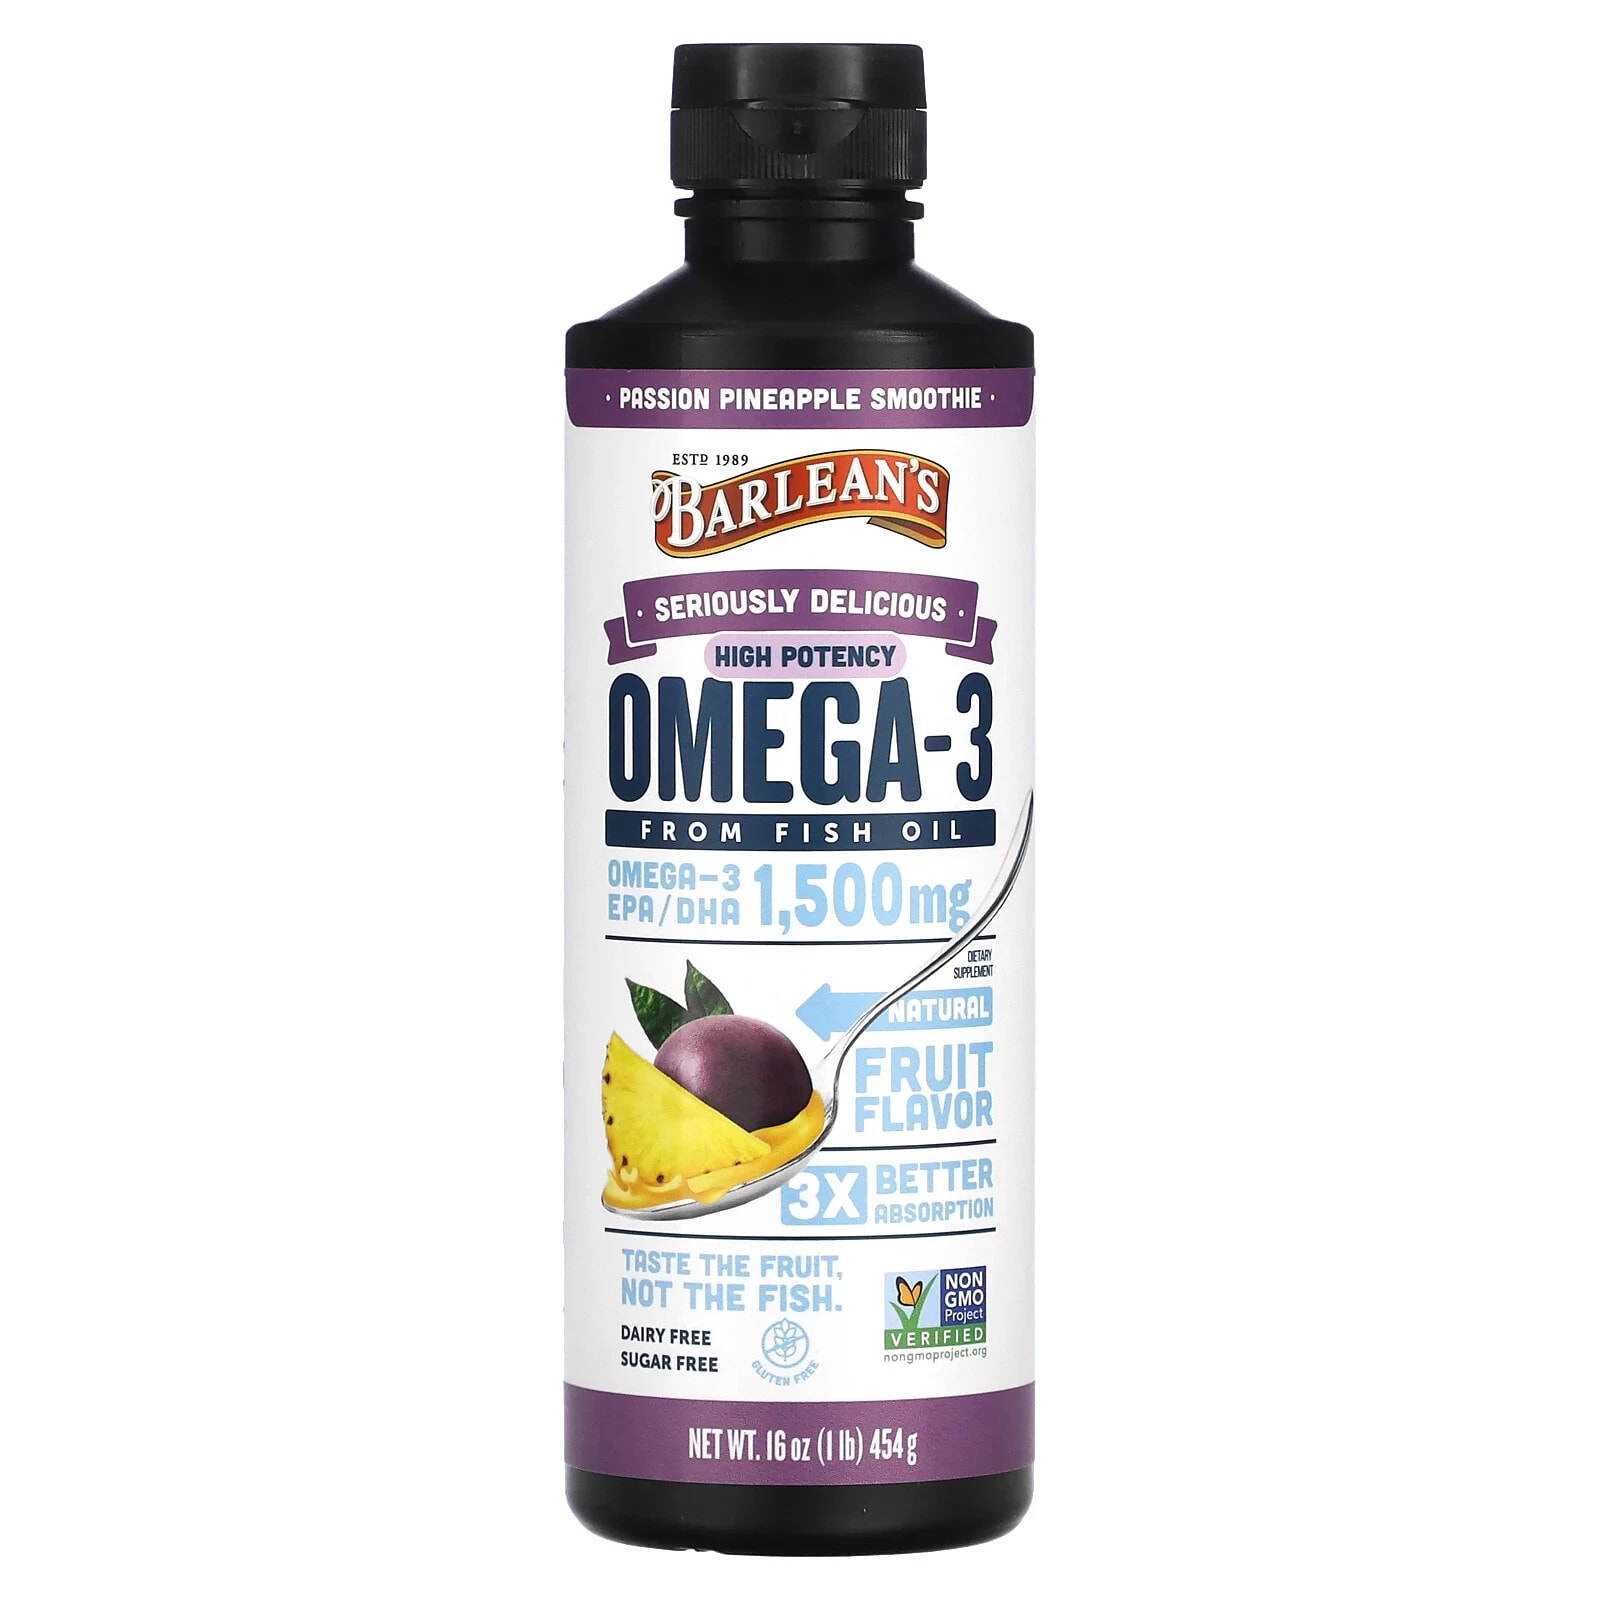 Seriously Delicious, Omega-3 Fish Oil, High Potency, Key Lime Pie, 1,500 mg, 16 oz (454 g)